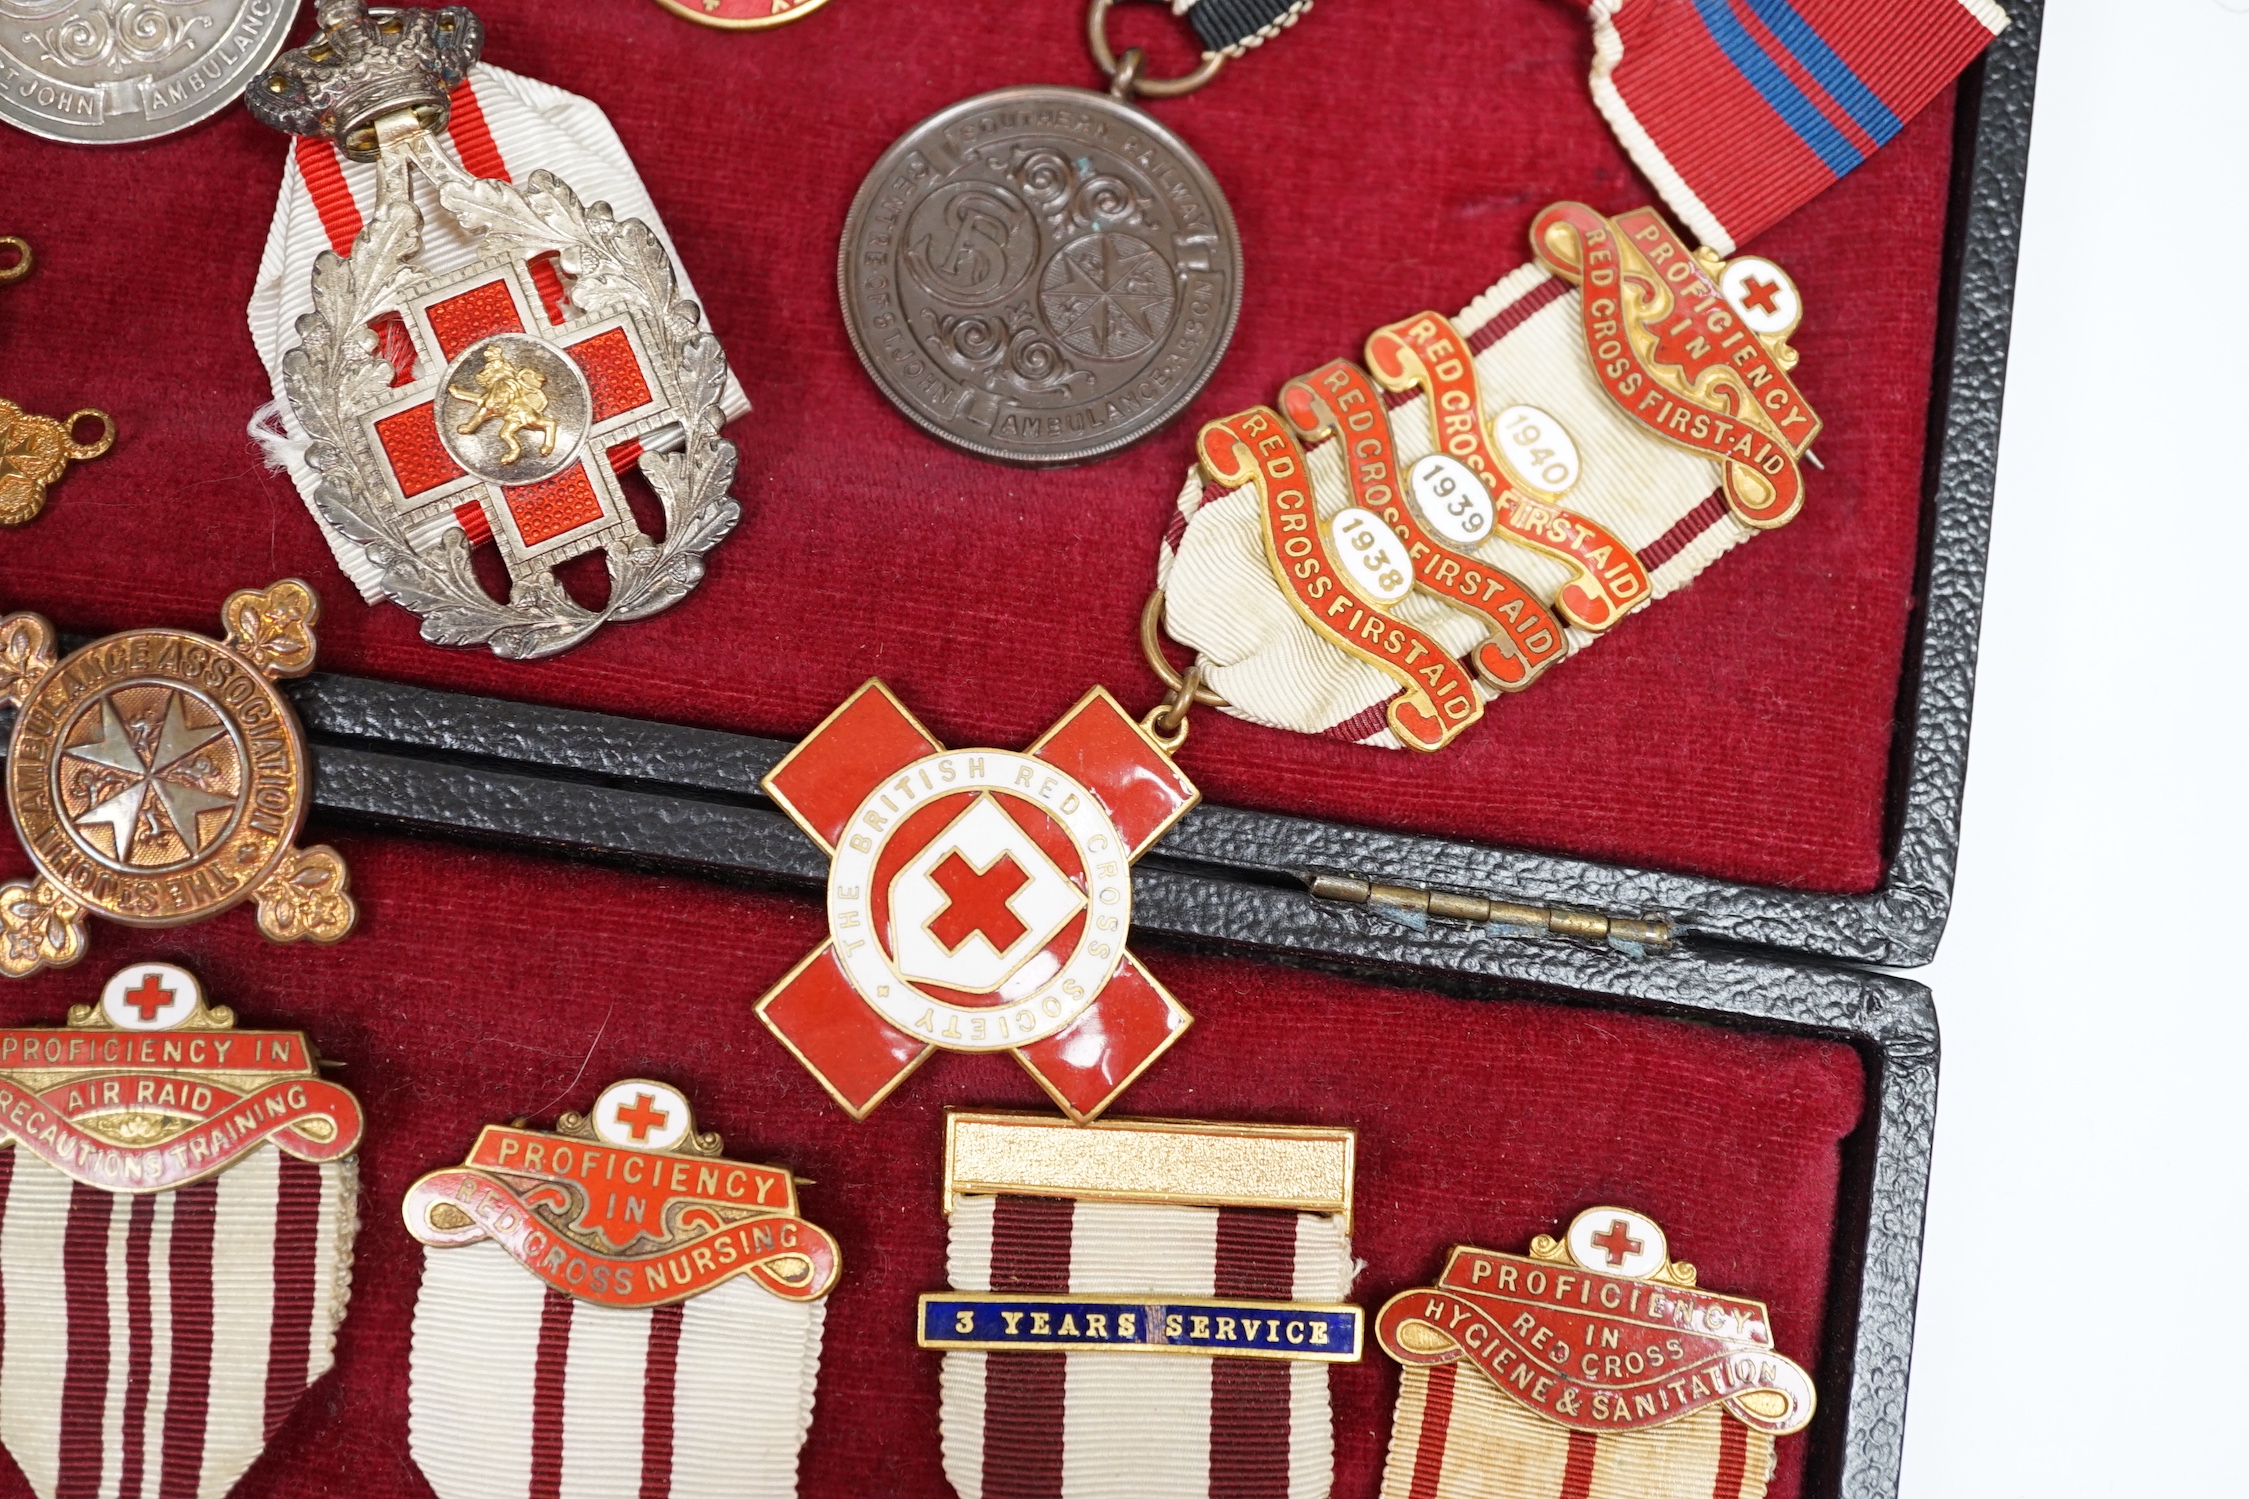 A collection of British Red Cross, etc. medals, awards and memorabilia including medals in original card boxes, a WWII medal group with miniatures including a Voluntary Medical Services Medal, proficiency in first aid me